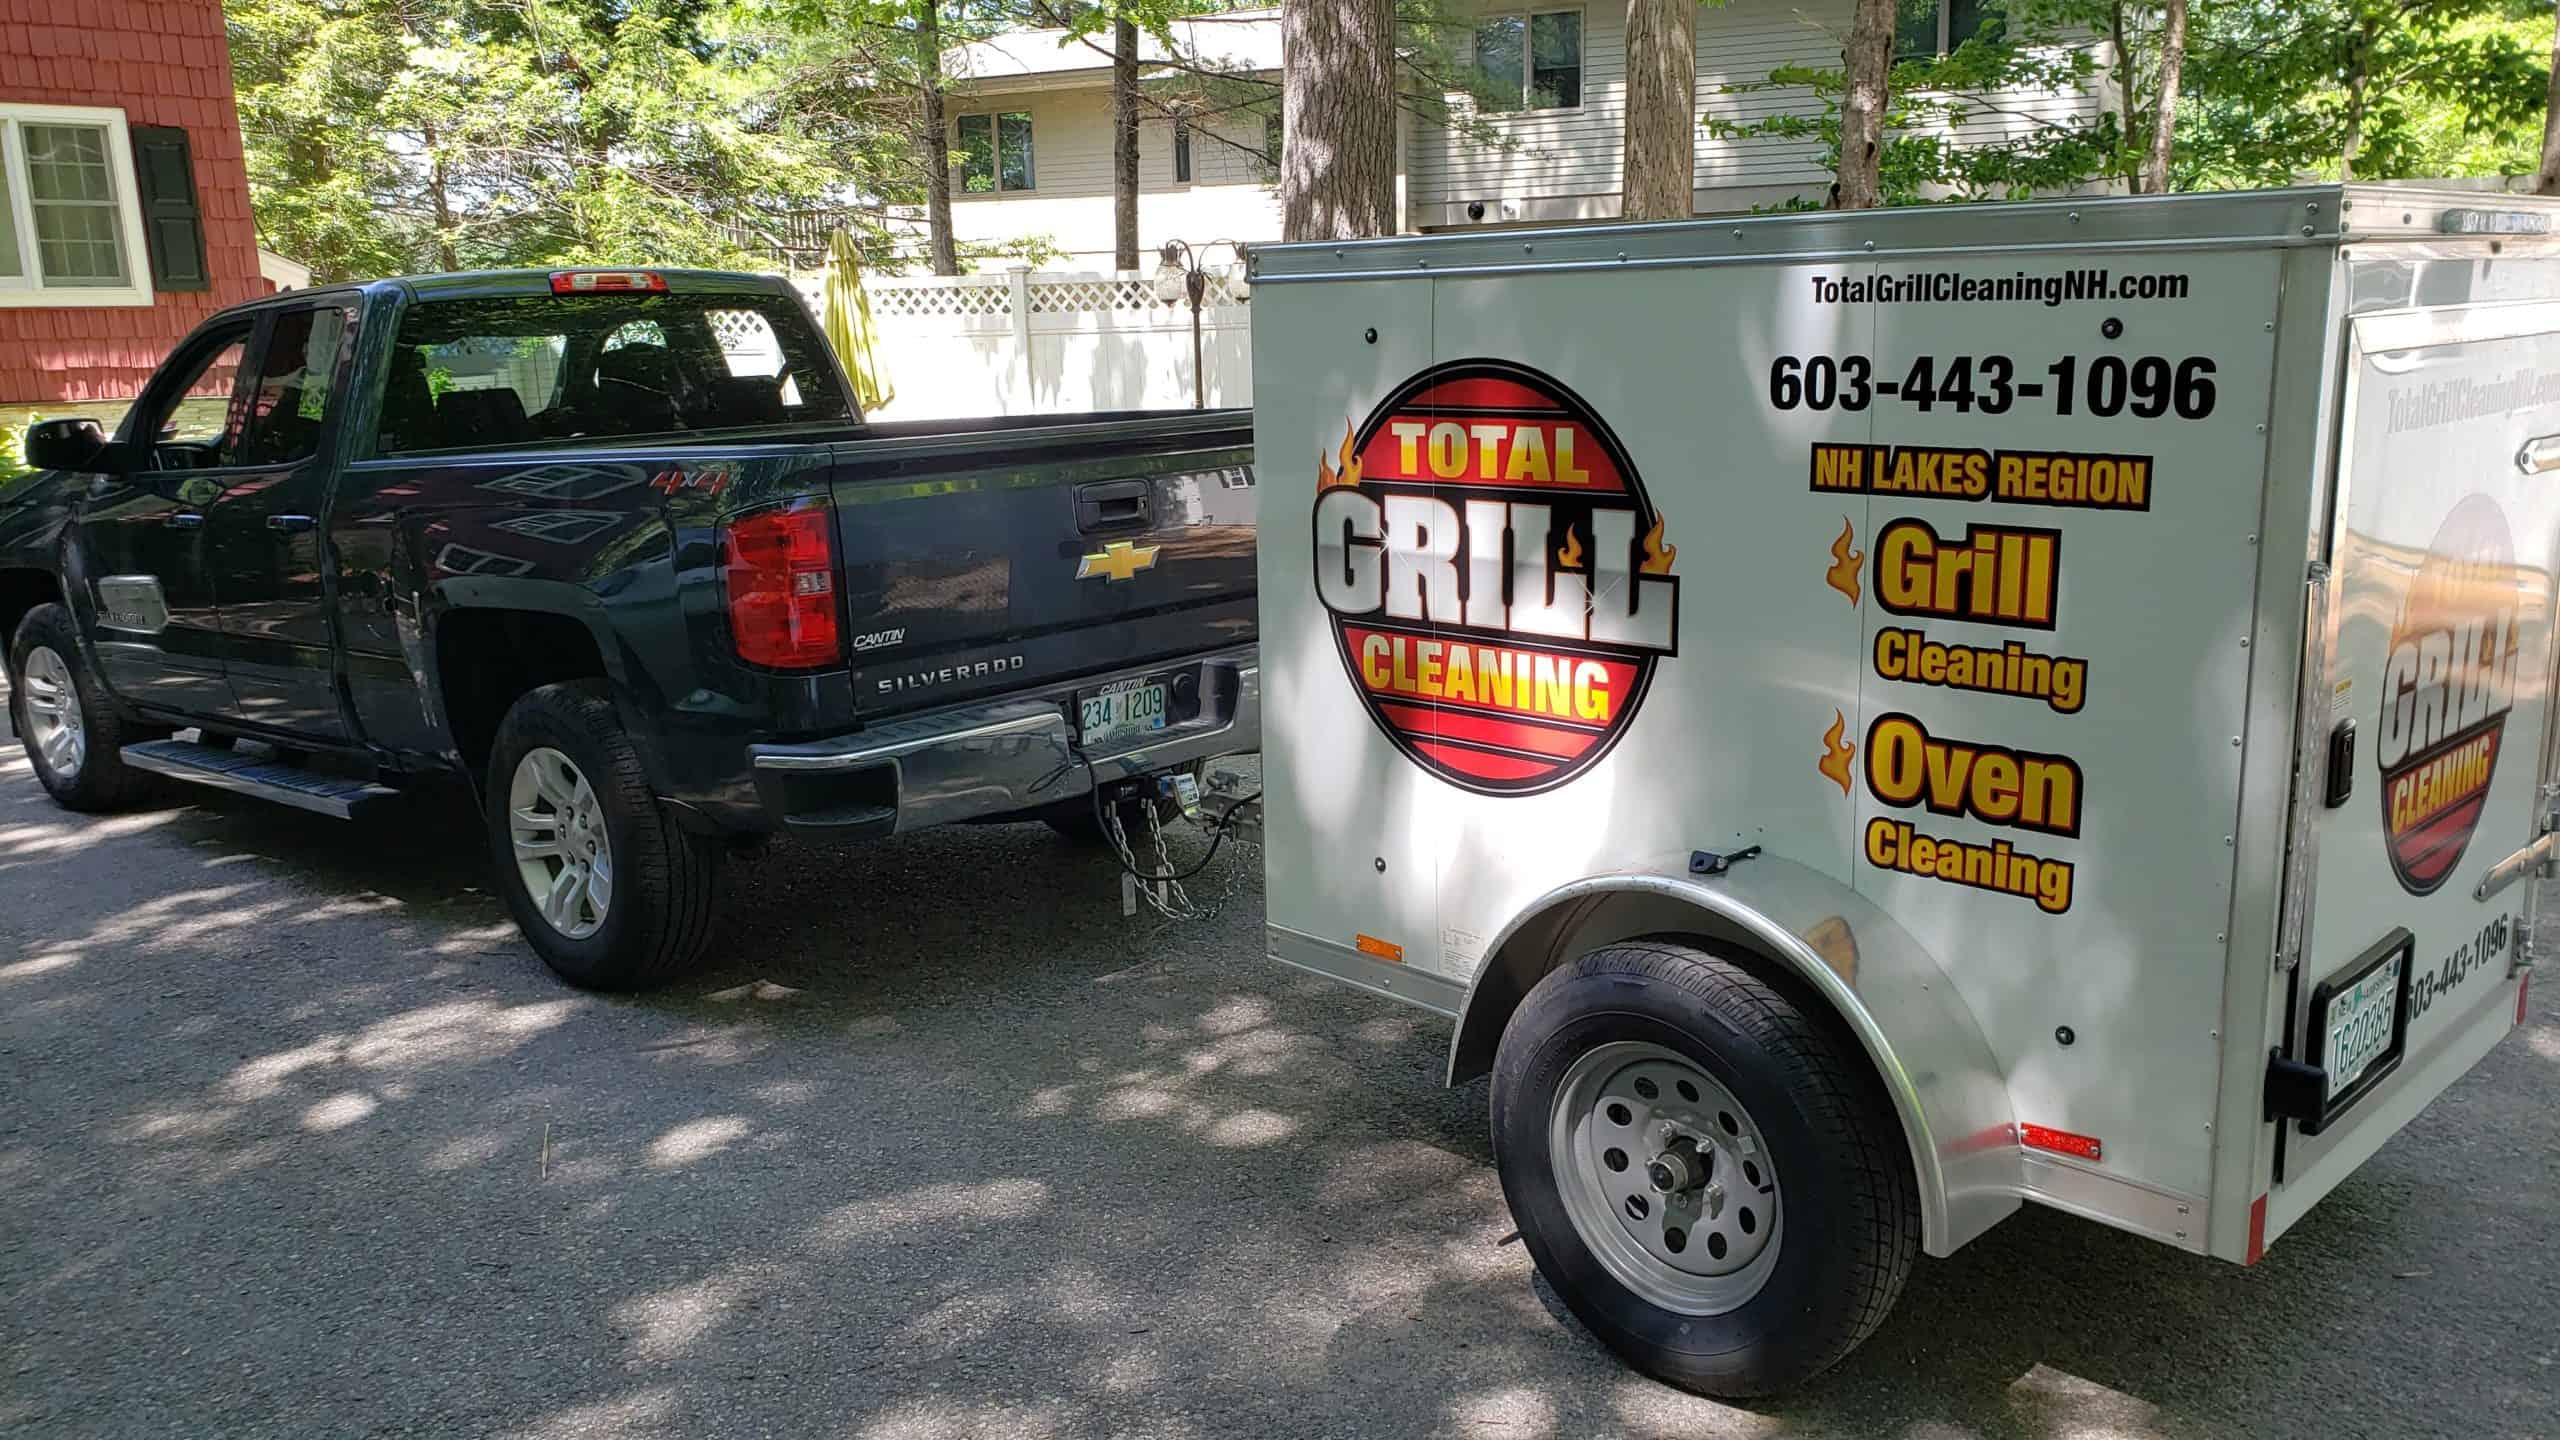 Grill Cleaning Service Lakes Region NH